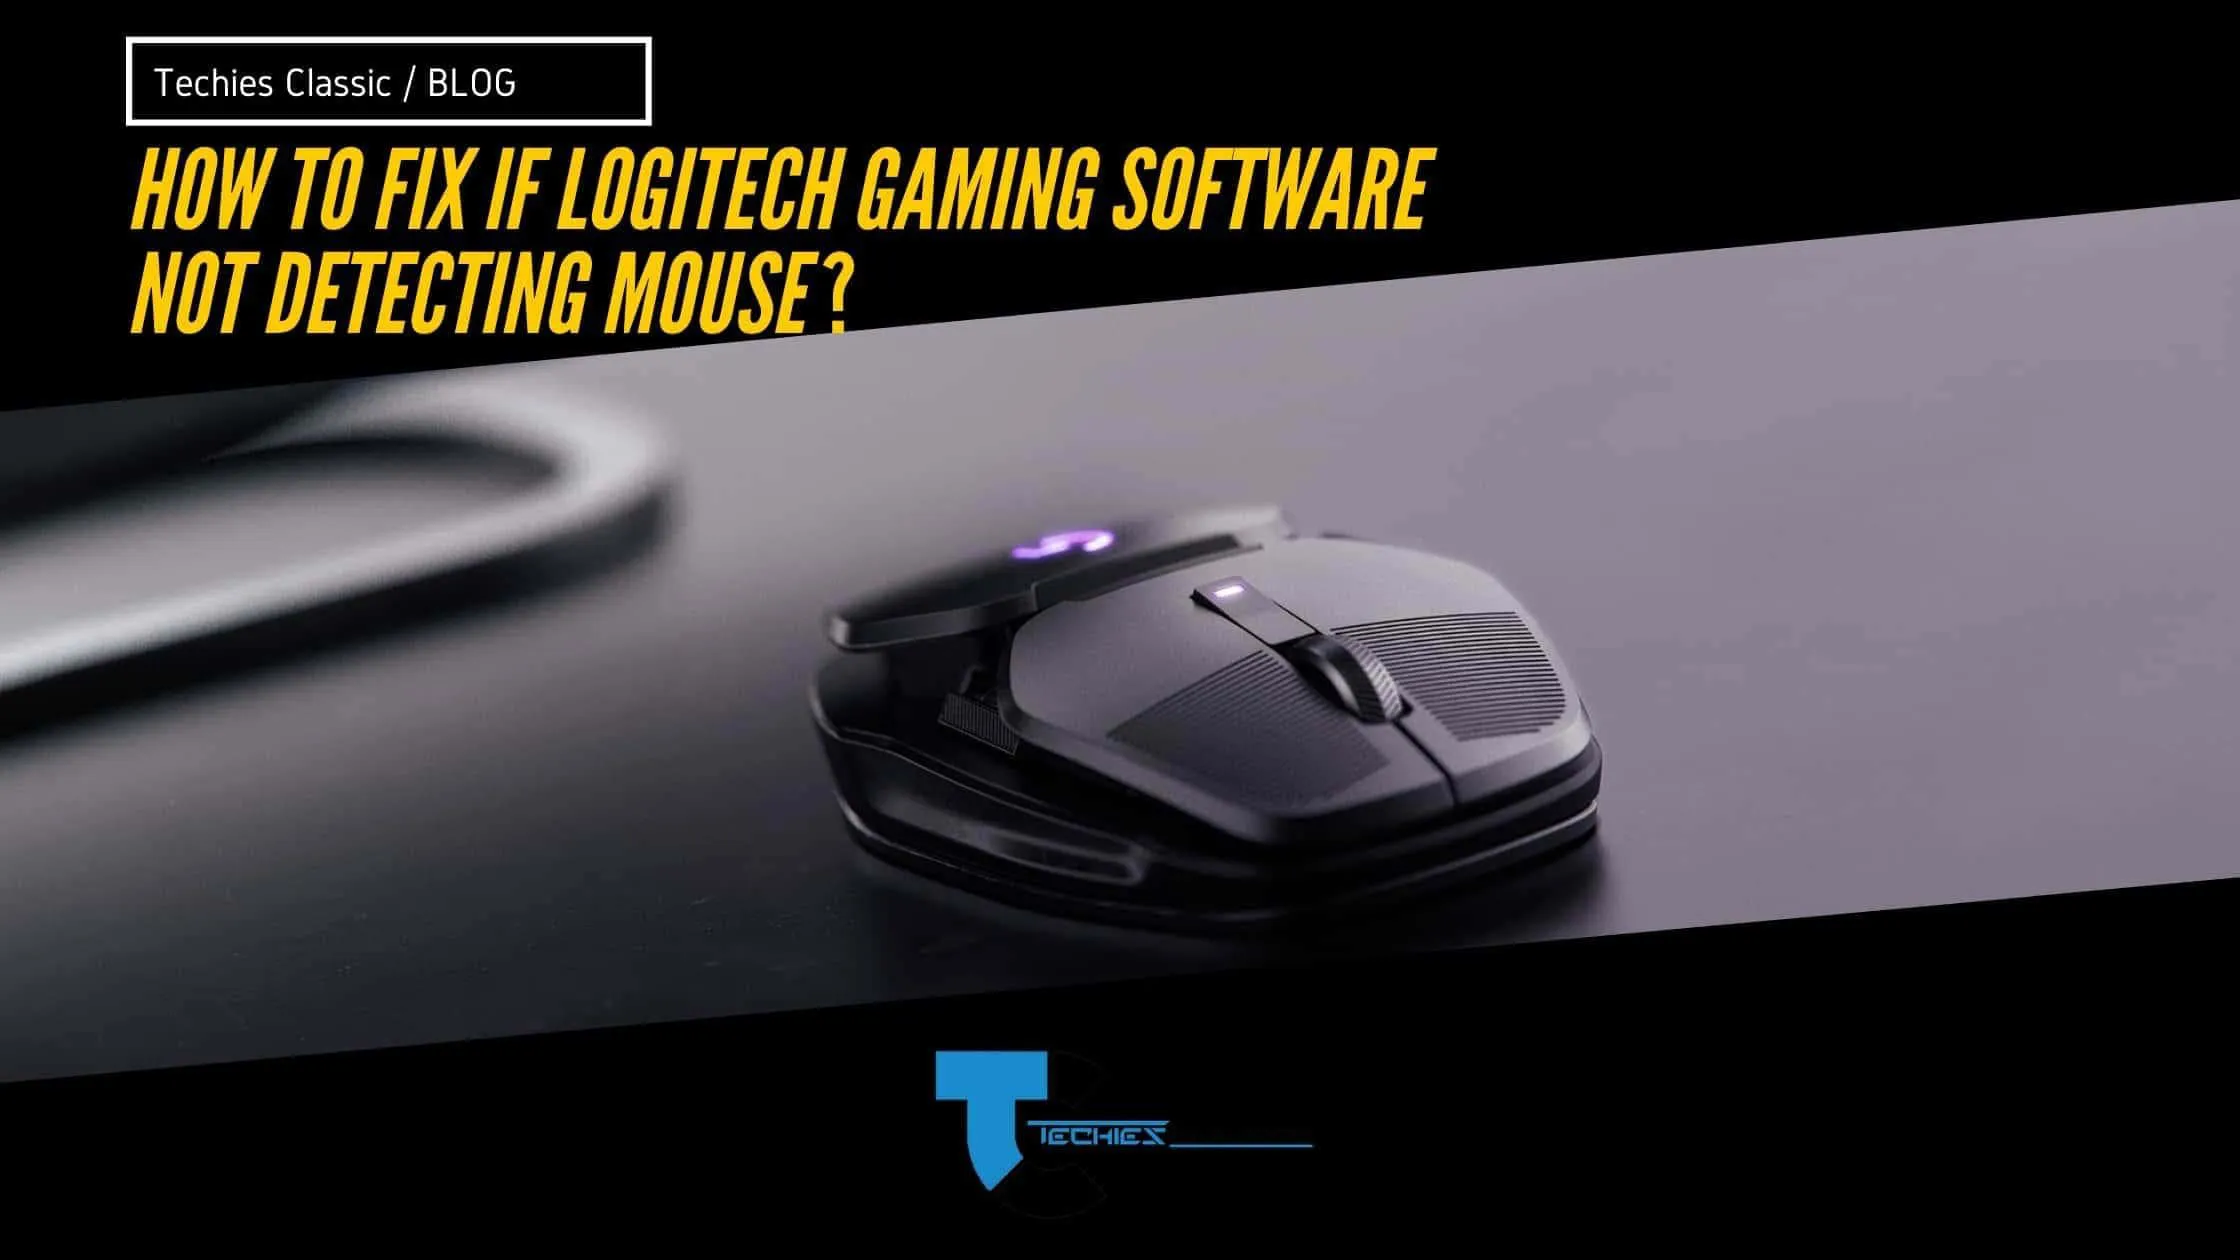 How to fix if Logitech gaming software not detecting mouse